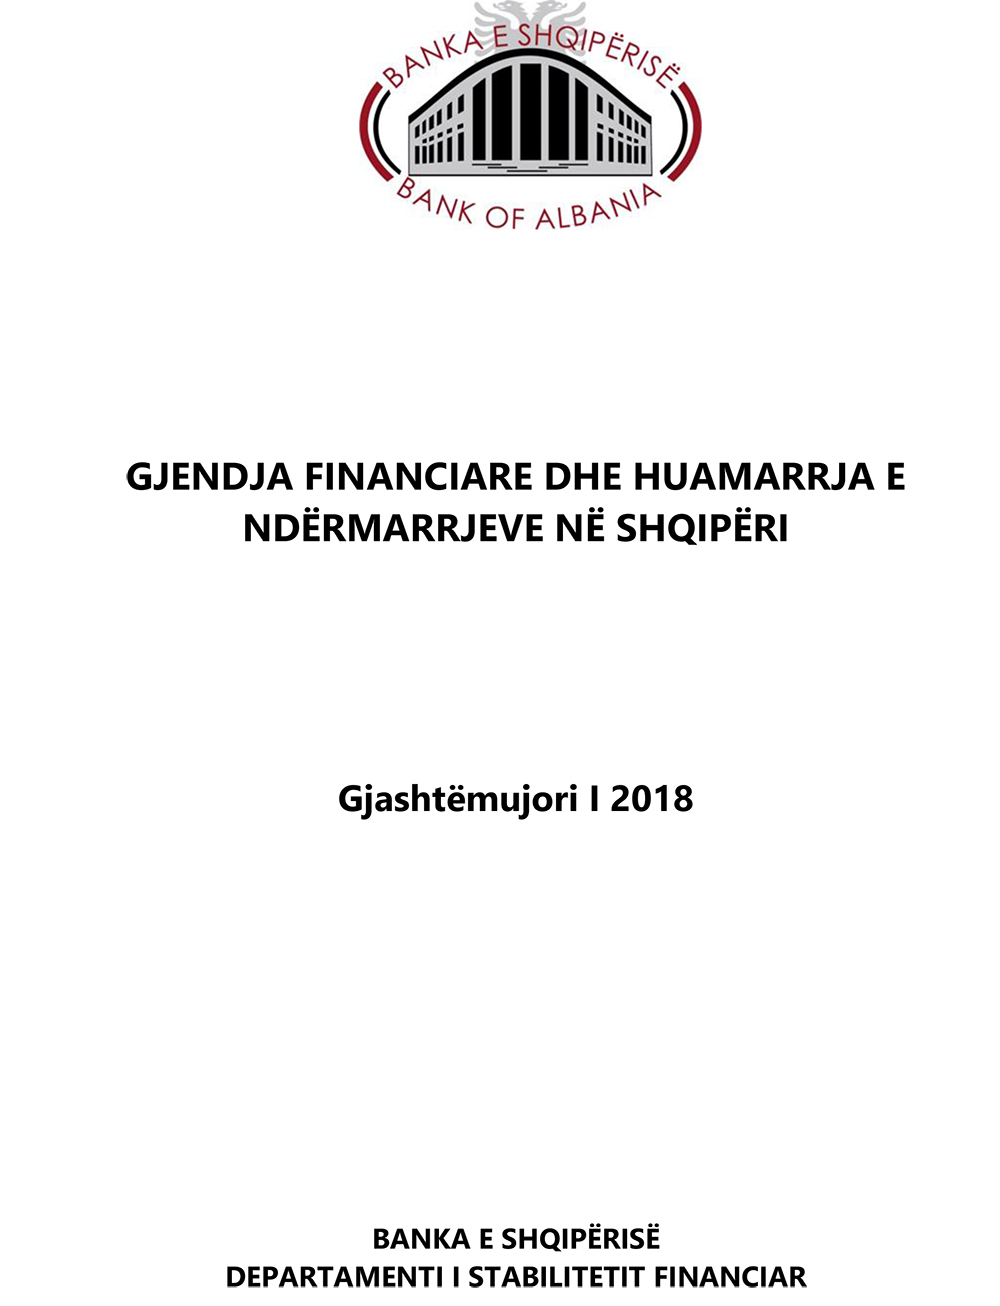 Survey on ''The financial and borrowing situation of enterprises in Albania'' H1 2018